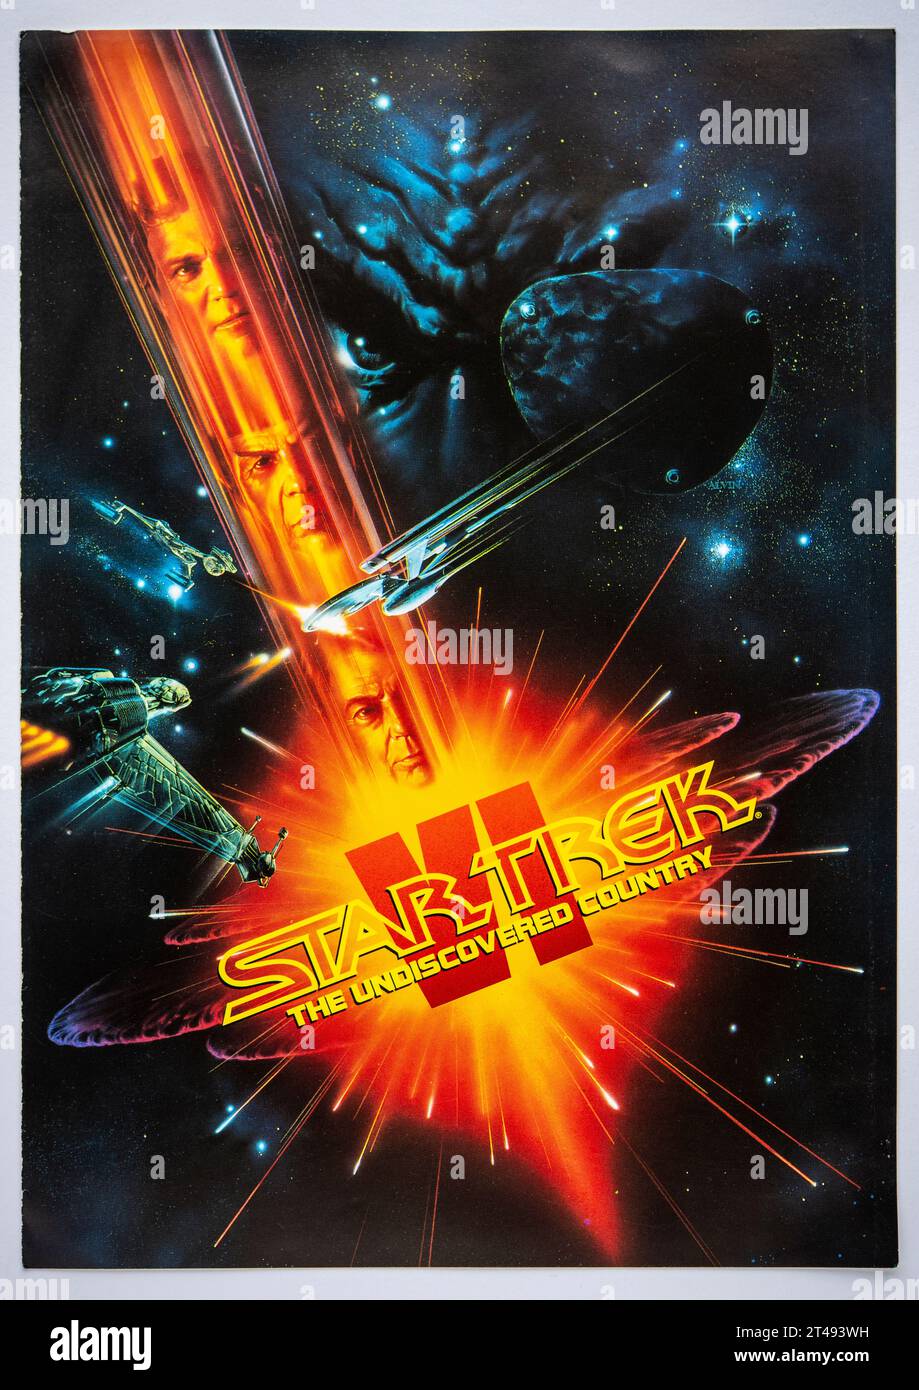 Front cover of publicity information for the movie Star Trek VI The Undiscovered Country, which was released in 1991 Stock Photo